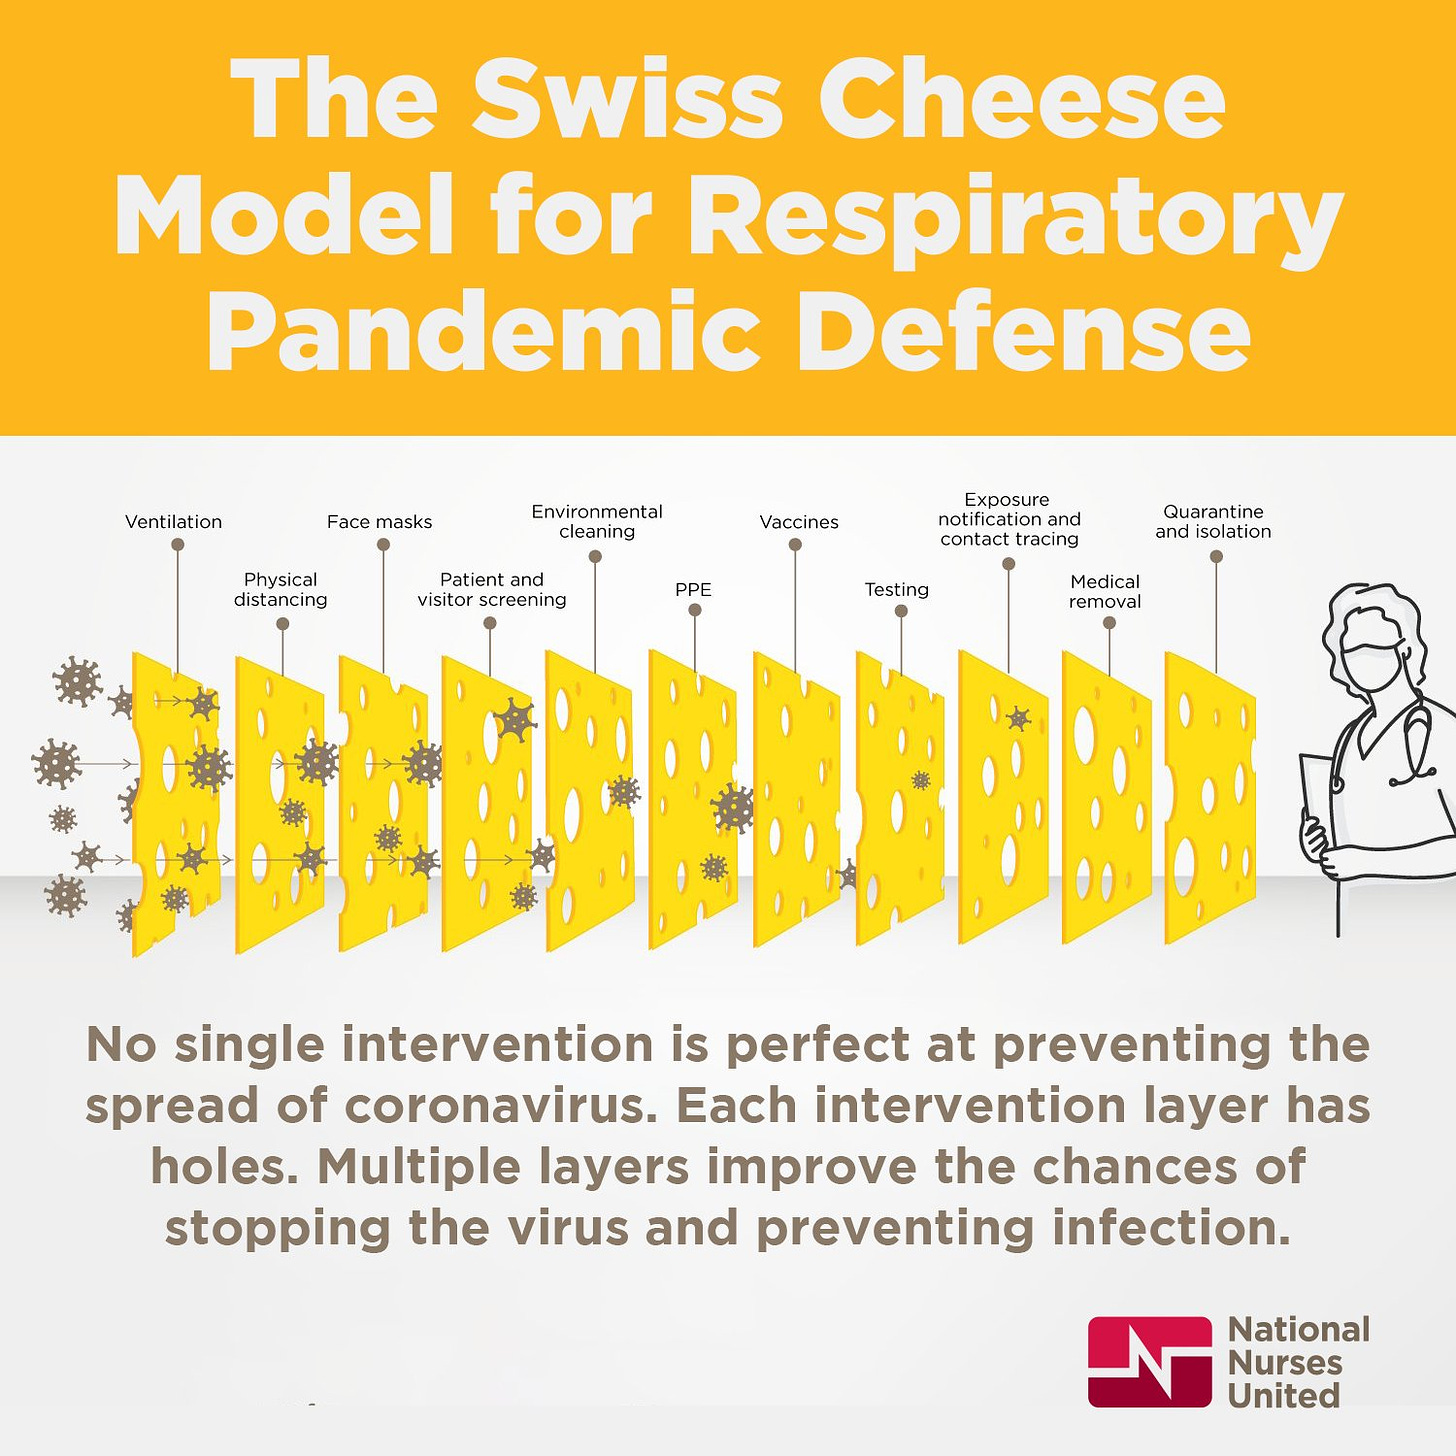 The Swiss Cheese Model for Aerosol- Transmitted Infectious Diseases Ventilation Universal Masking Reducing Occupant Density Environmental Cleaning Screening and Isolation Vaccines PPE Contact Tracing and Post-Exposure Quarantine Paid Sick Leave Testing No single intervention is perfect at preventing the spread of aerosol-transmitted infectious diseases. Each intervention layer has holes. Multiple layers improve the chances of stopping infectious aerosols and preventing infection. Nurses’ Guide to Improving Indoor Air Quality in Health Care by National Nurses United